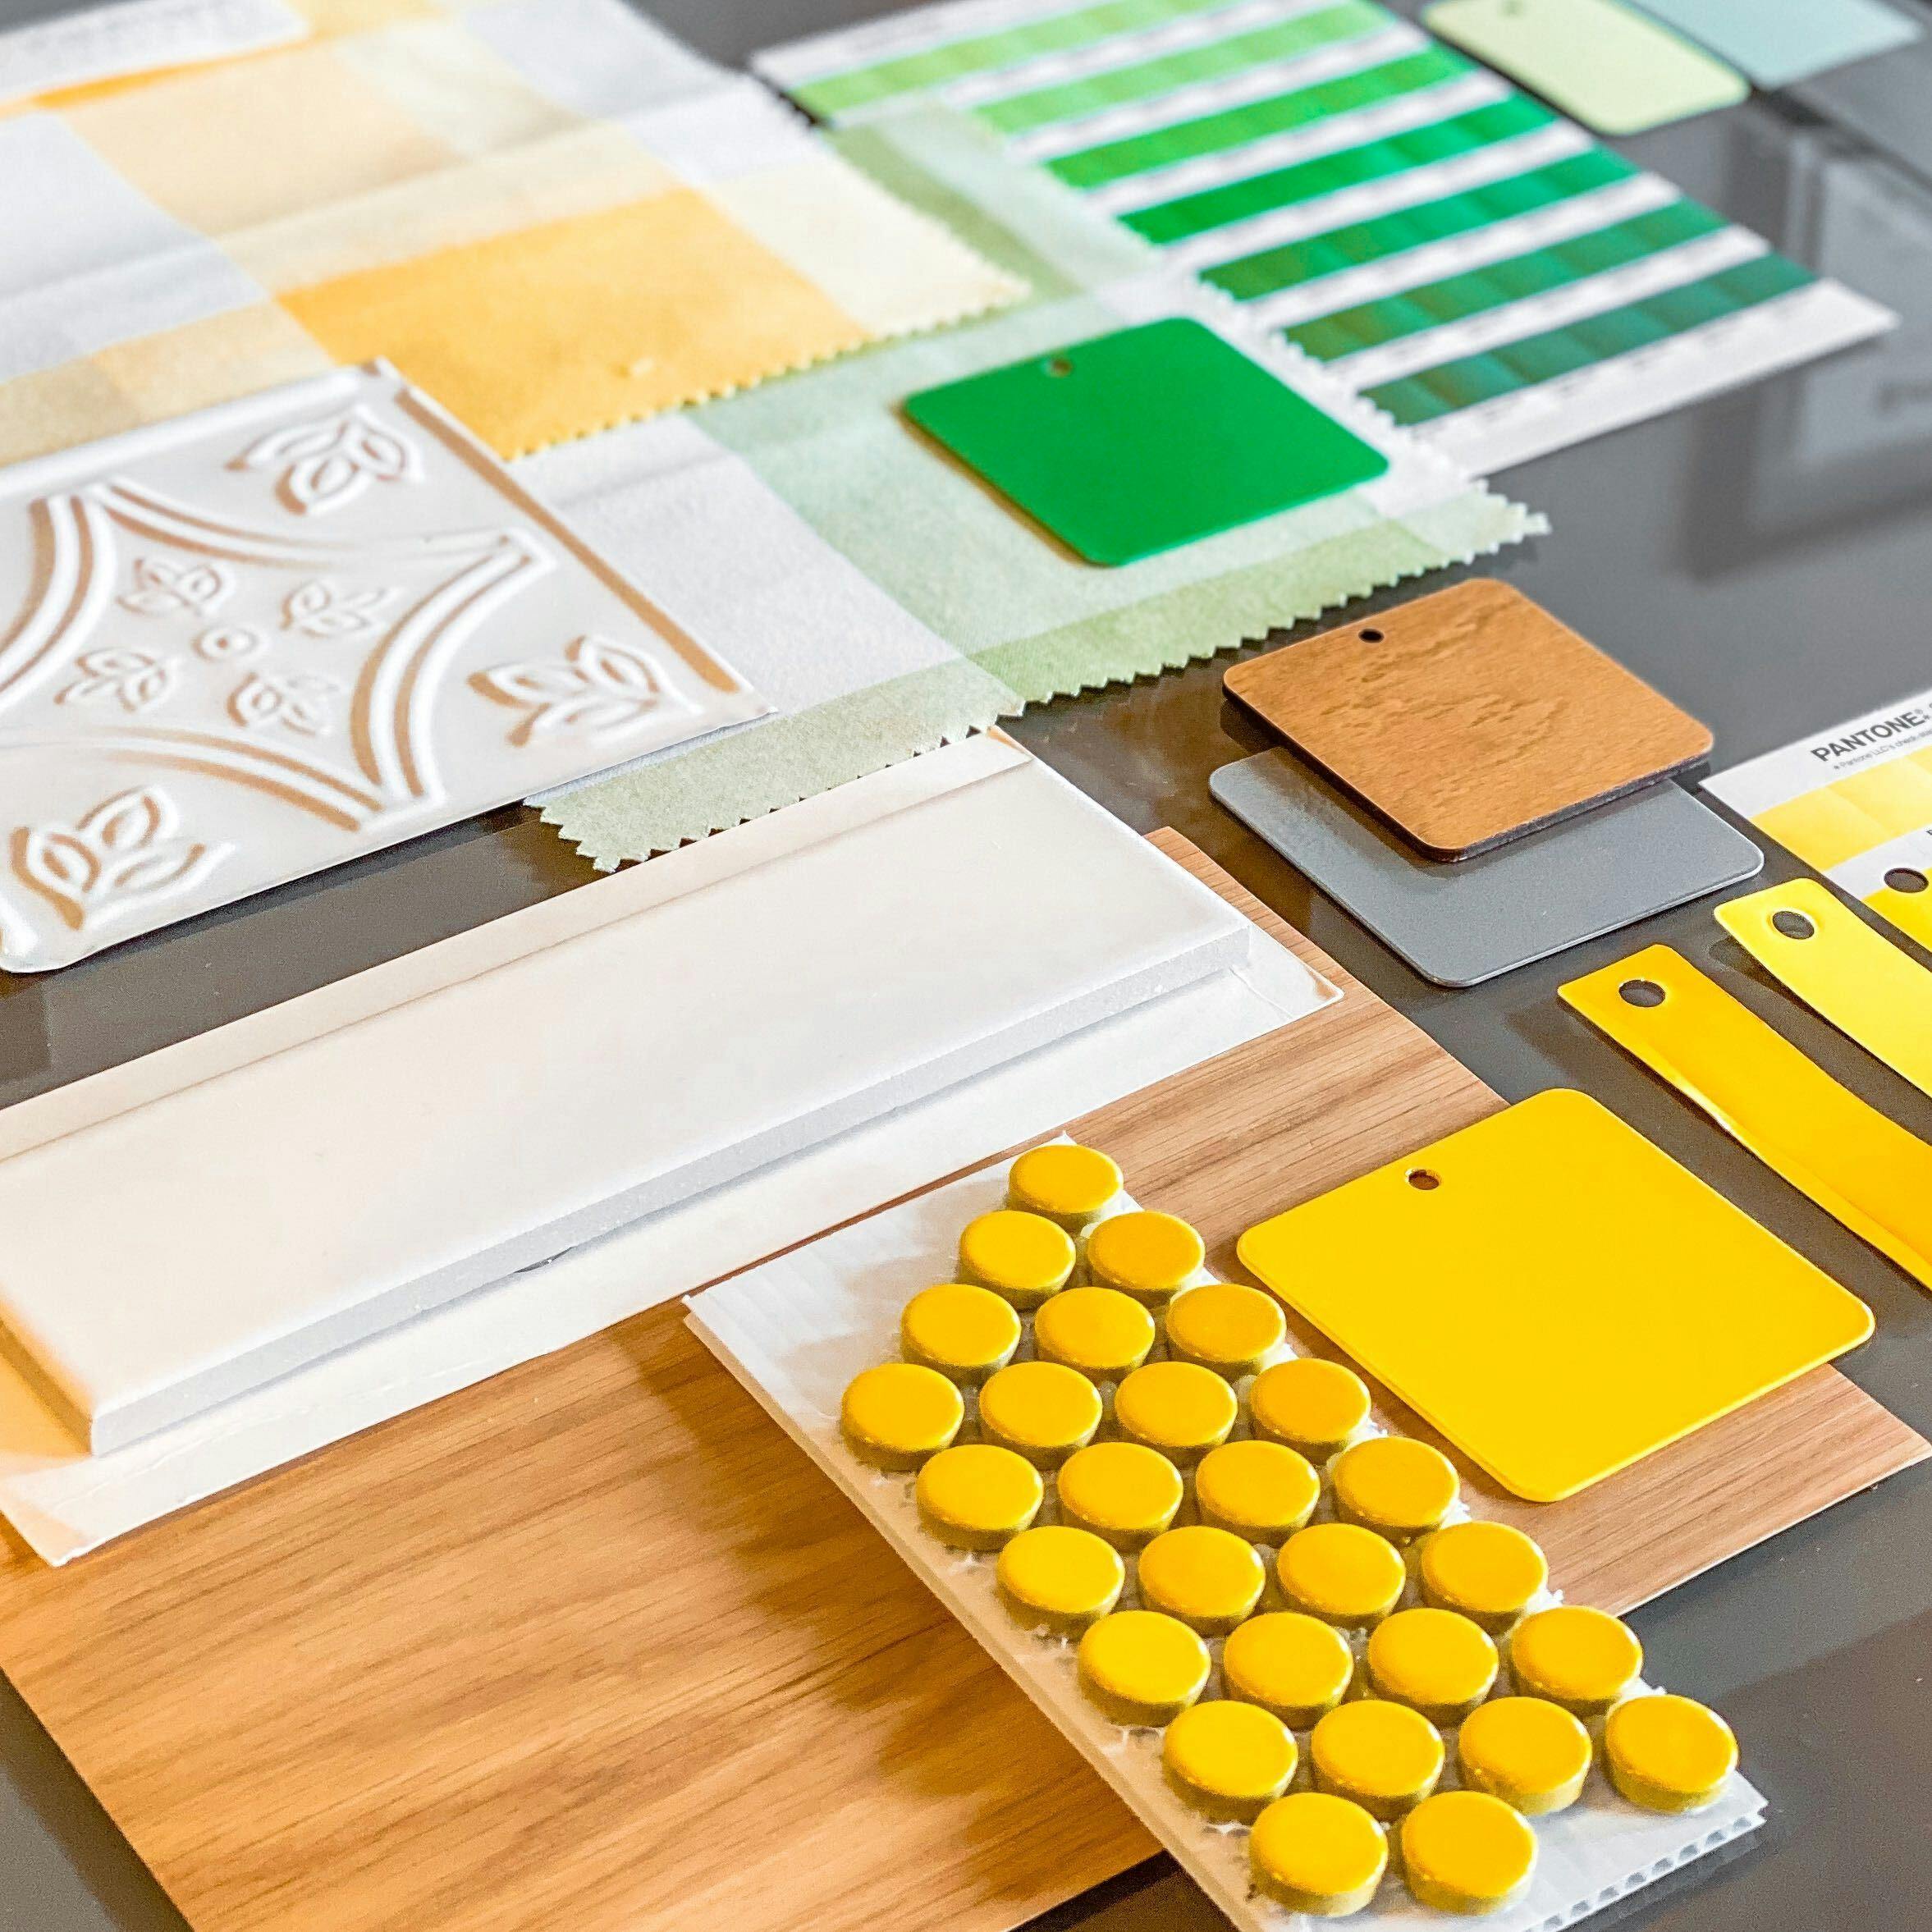 We’re creating a bright, friendly, and refreshing atmosphere with this citrus-inspired material palette.